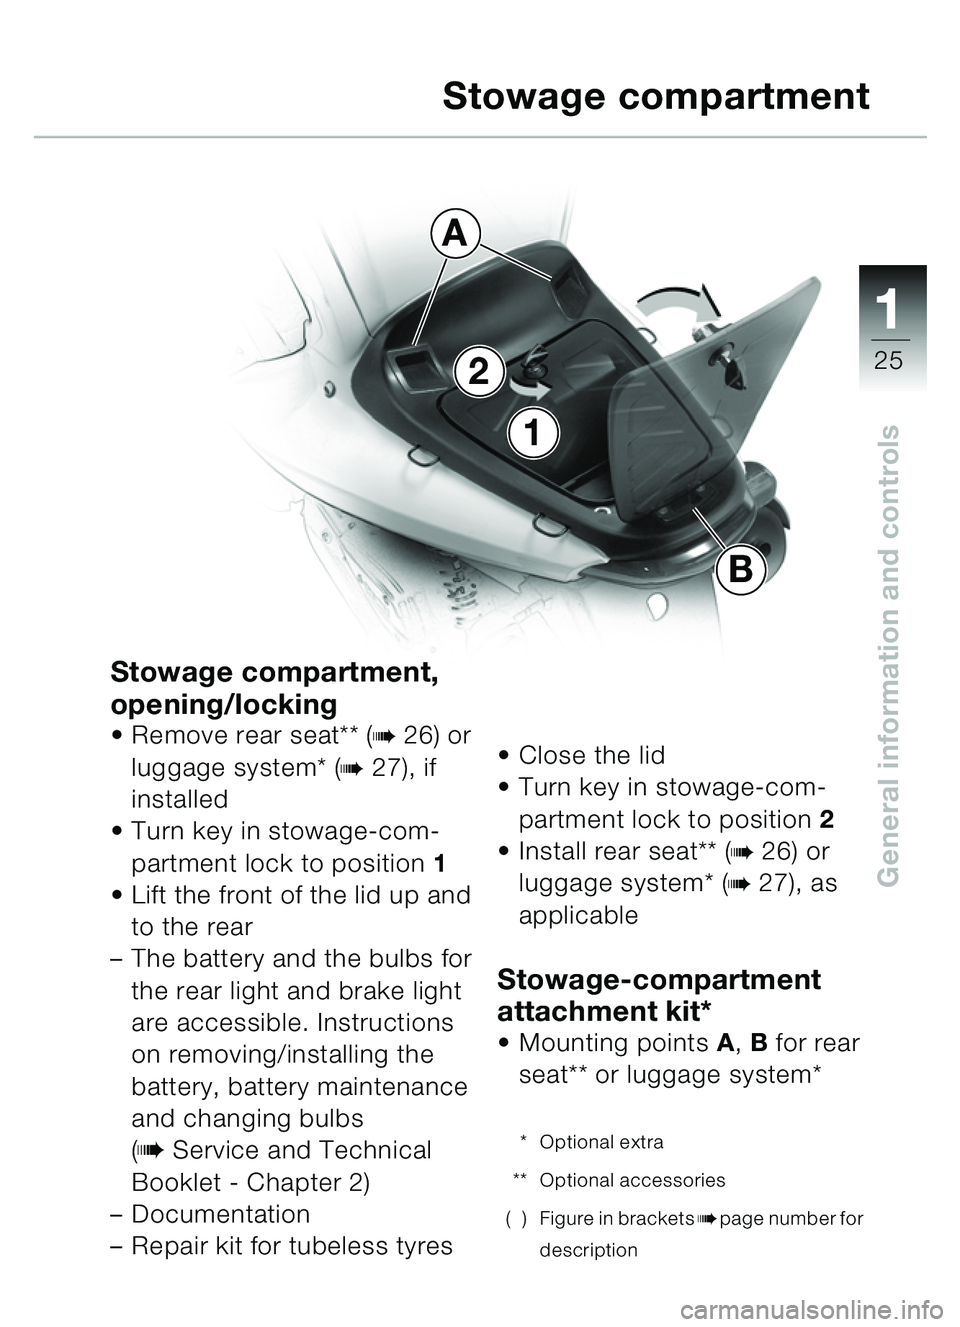 BMW MOTORRAD C1 2000  Riders Manual (in English) 111
25
General information and controls
1
2
A
B
Stowage compartment,
opening/locking
Remove rear seat** (b26) or 
luggage system* (
b27), if 
installed
 Turn key in stowage-com-
partment lock to pos